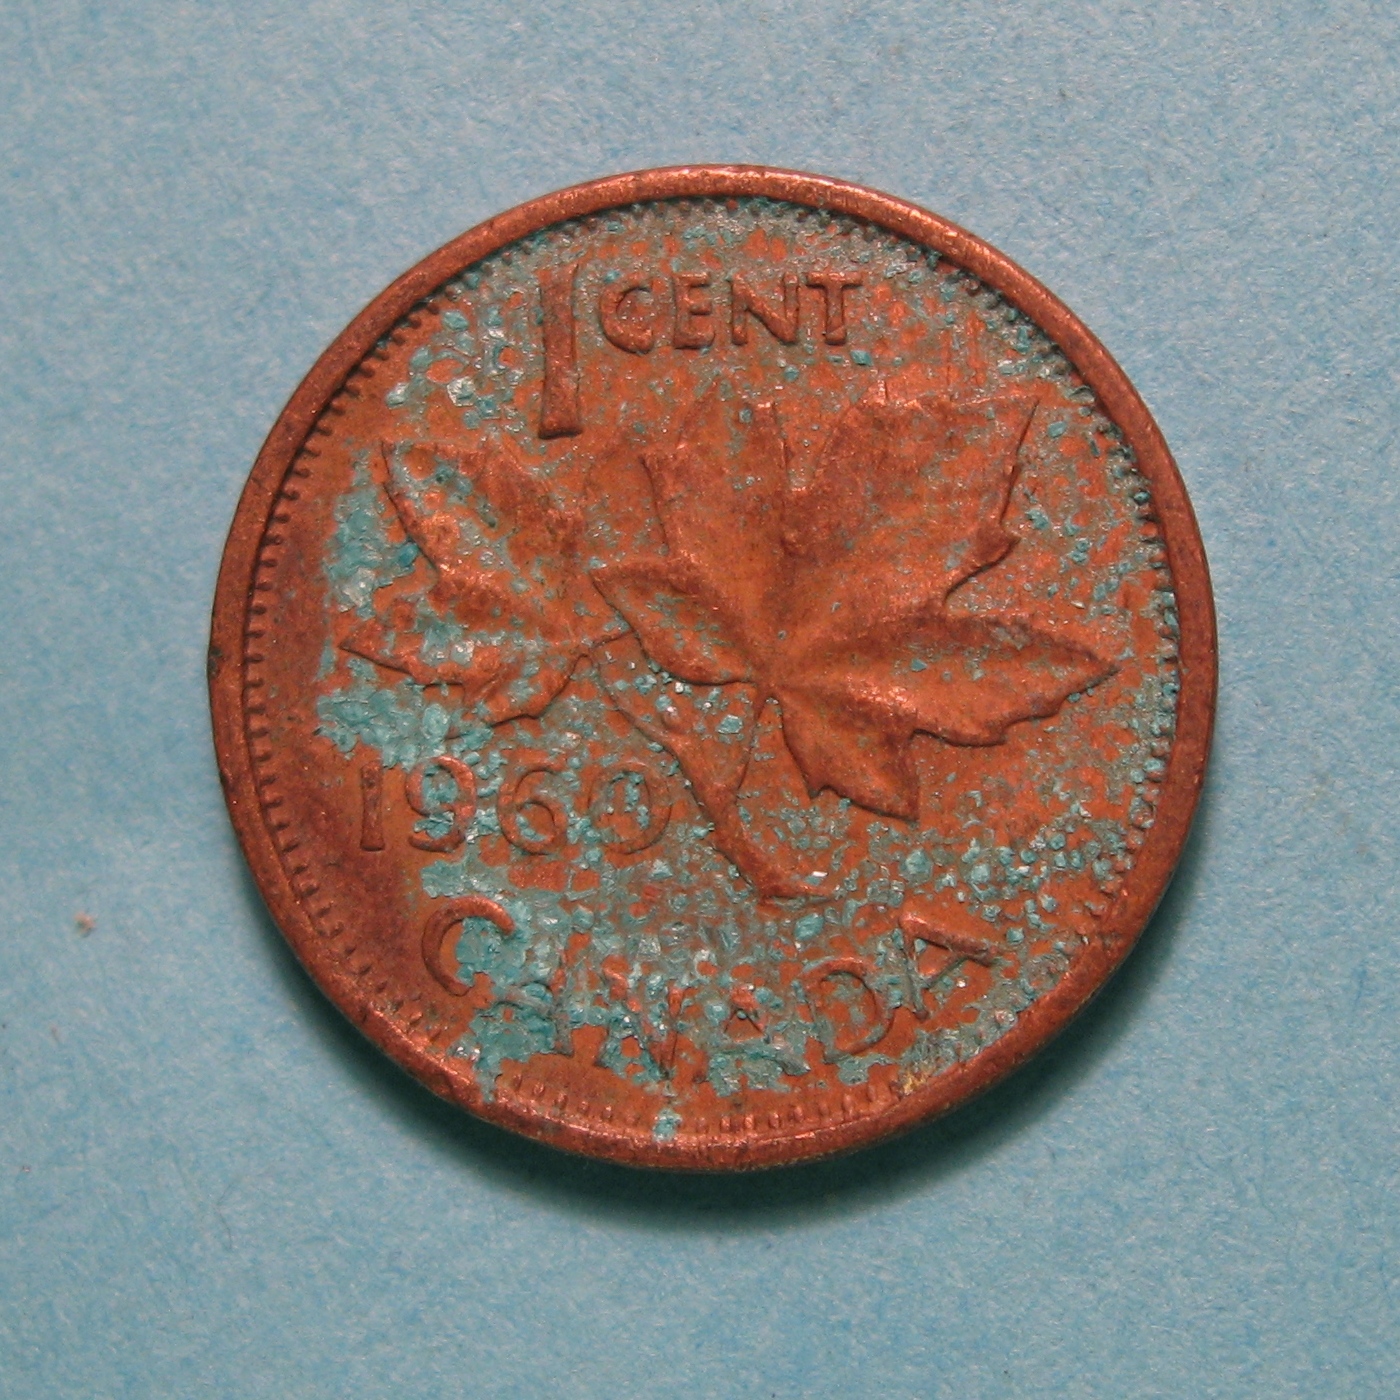 1-cent-1960-can-pm-taches-vertes-revers.jpg